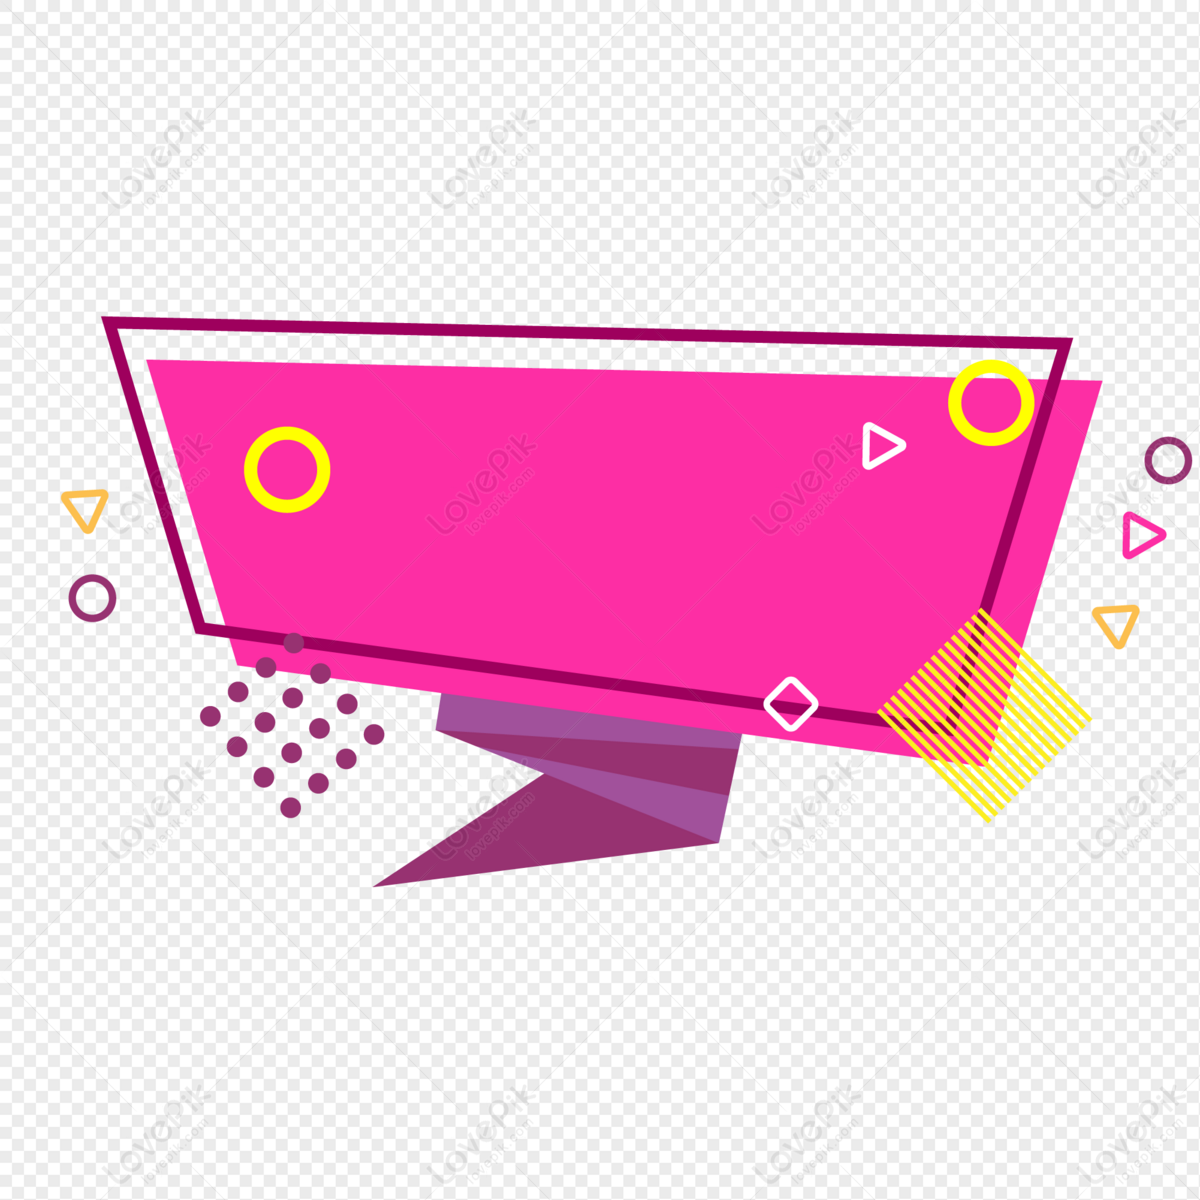 Magenta Promotional Banner Background PNG Image Free Download And Clipart  Image For Free Download - Lovepik | 401335881